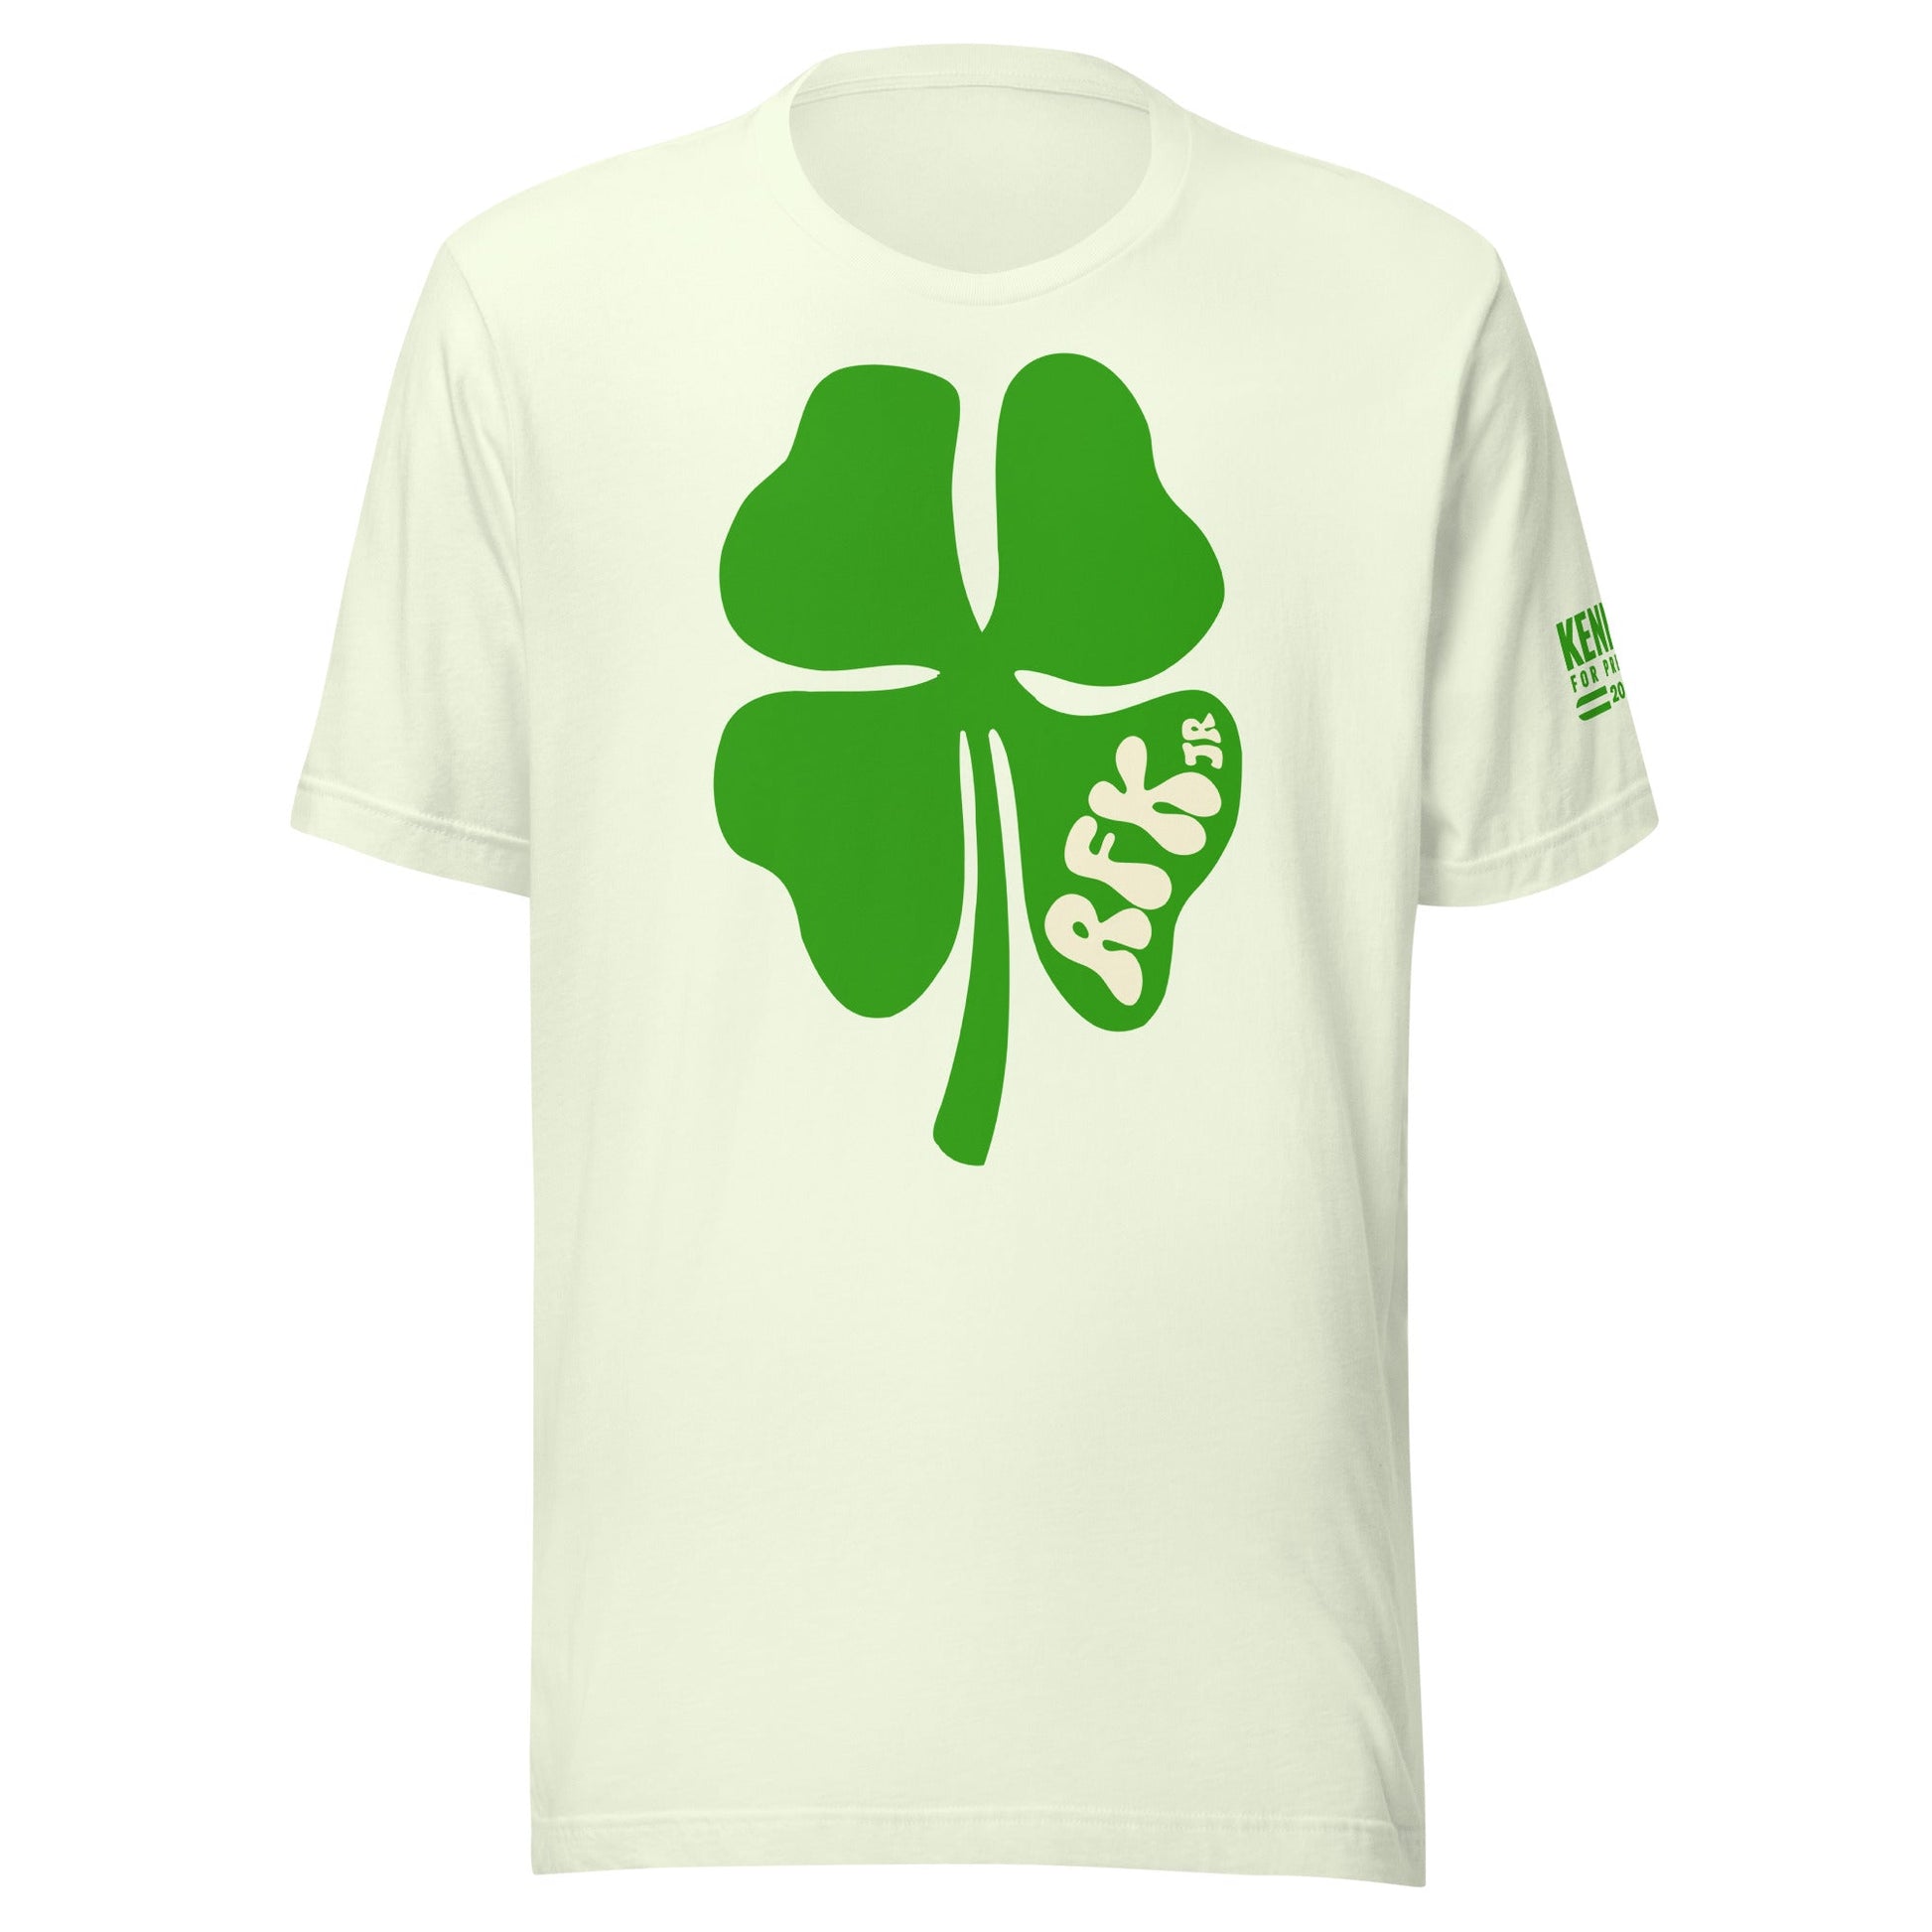 RFK Jr. Clover Unisex Tee - TEAM KENNEDY. All rights reserved